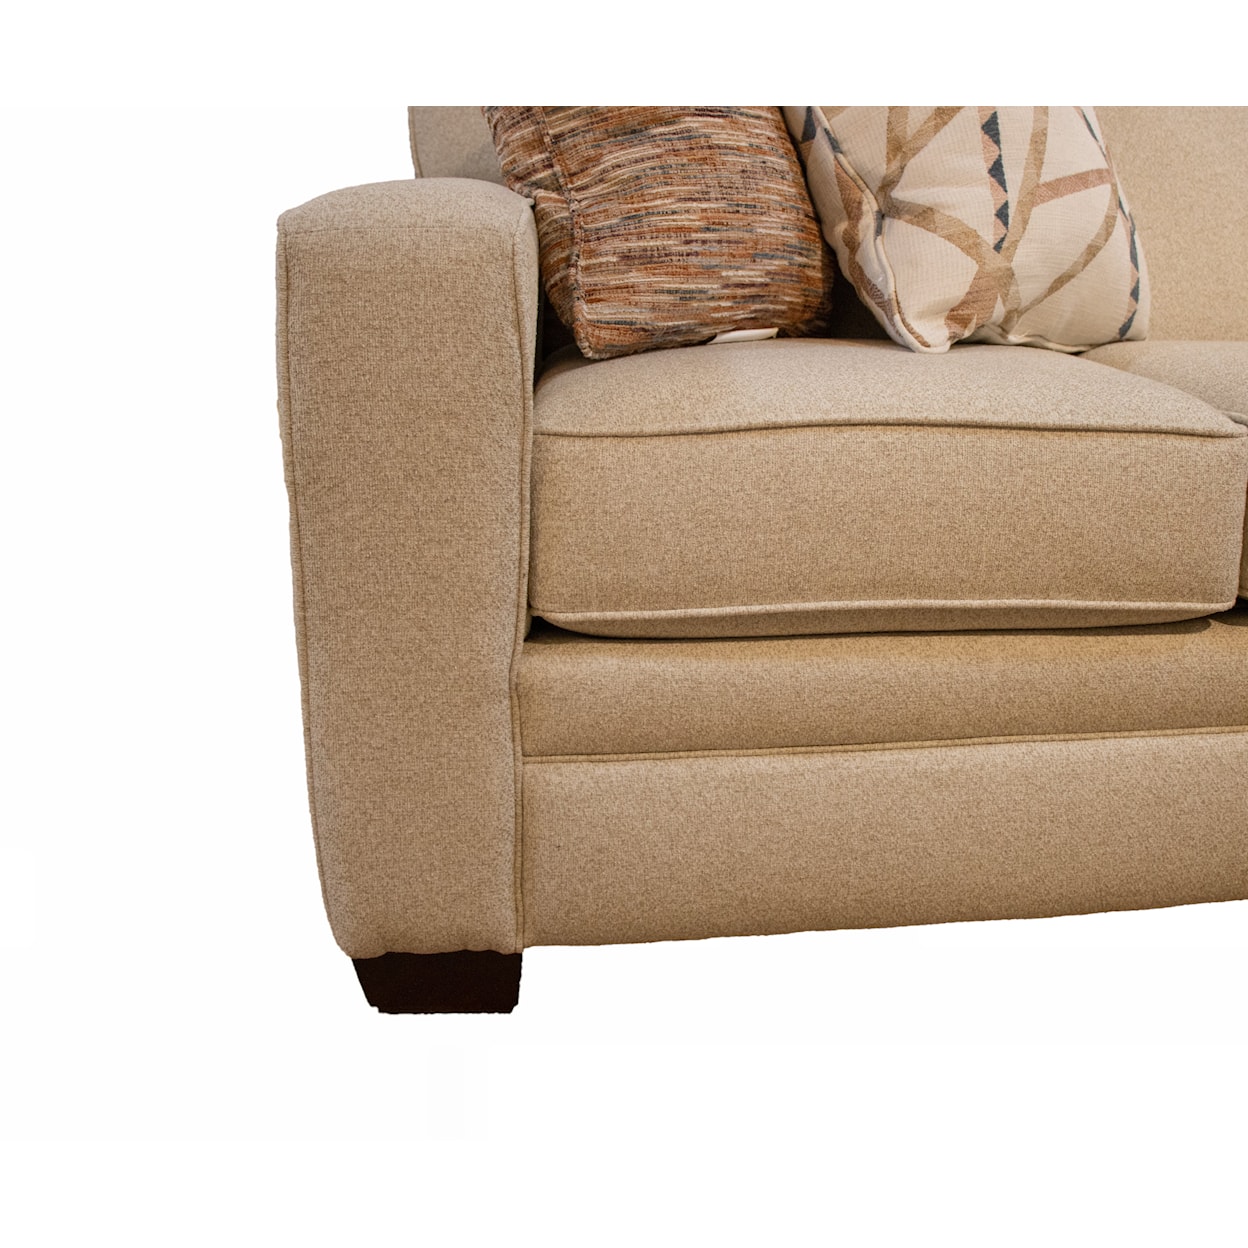 England 6000 Series 3 Piece Transitional Sectional